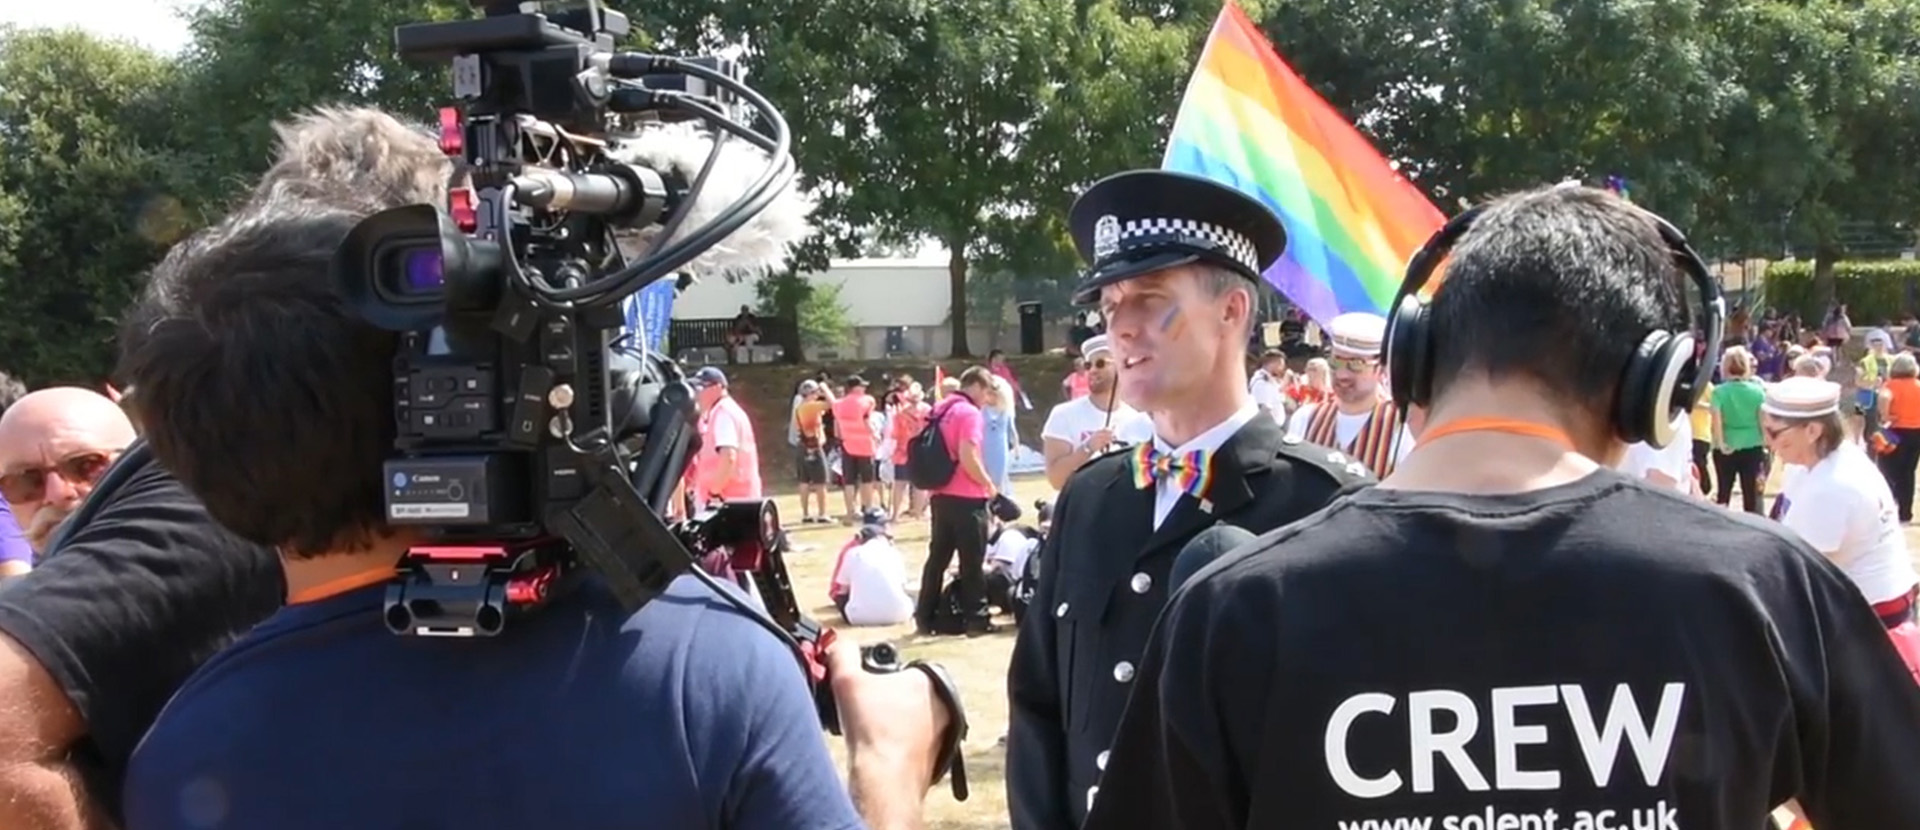 Students filming at Isle of Wight Pride